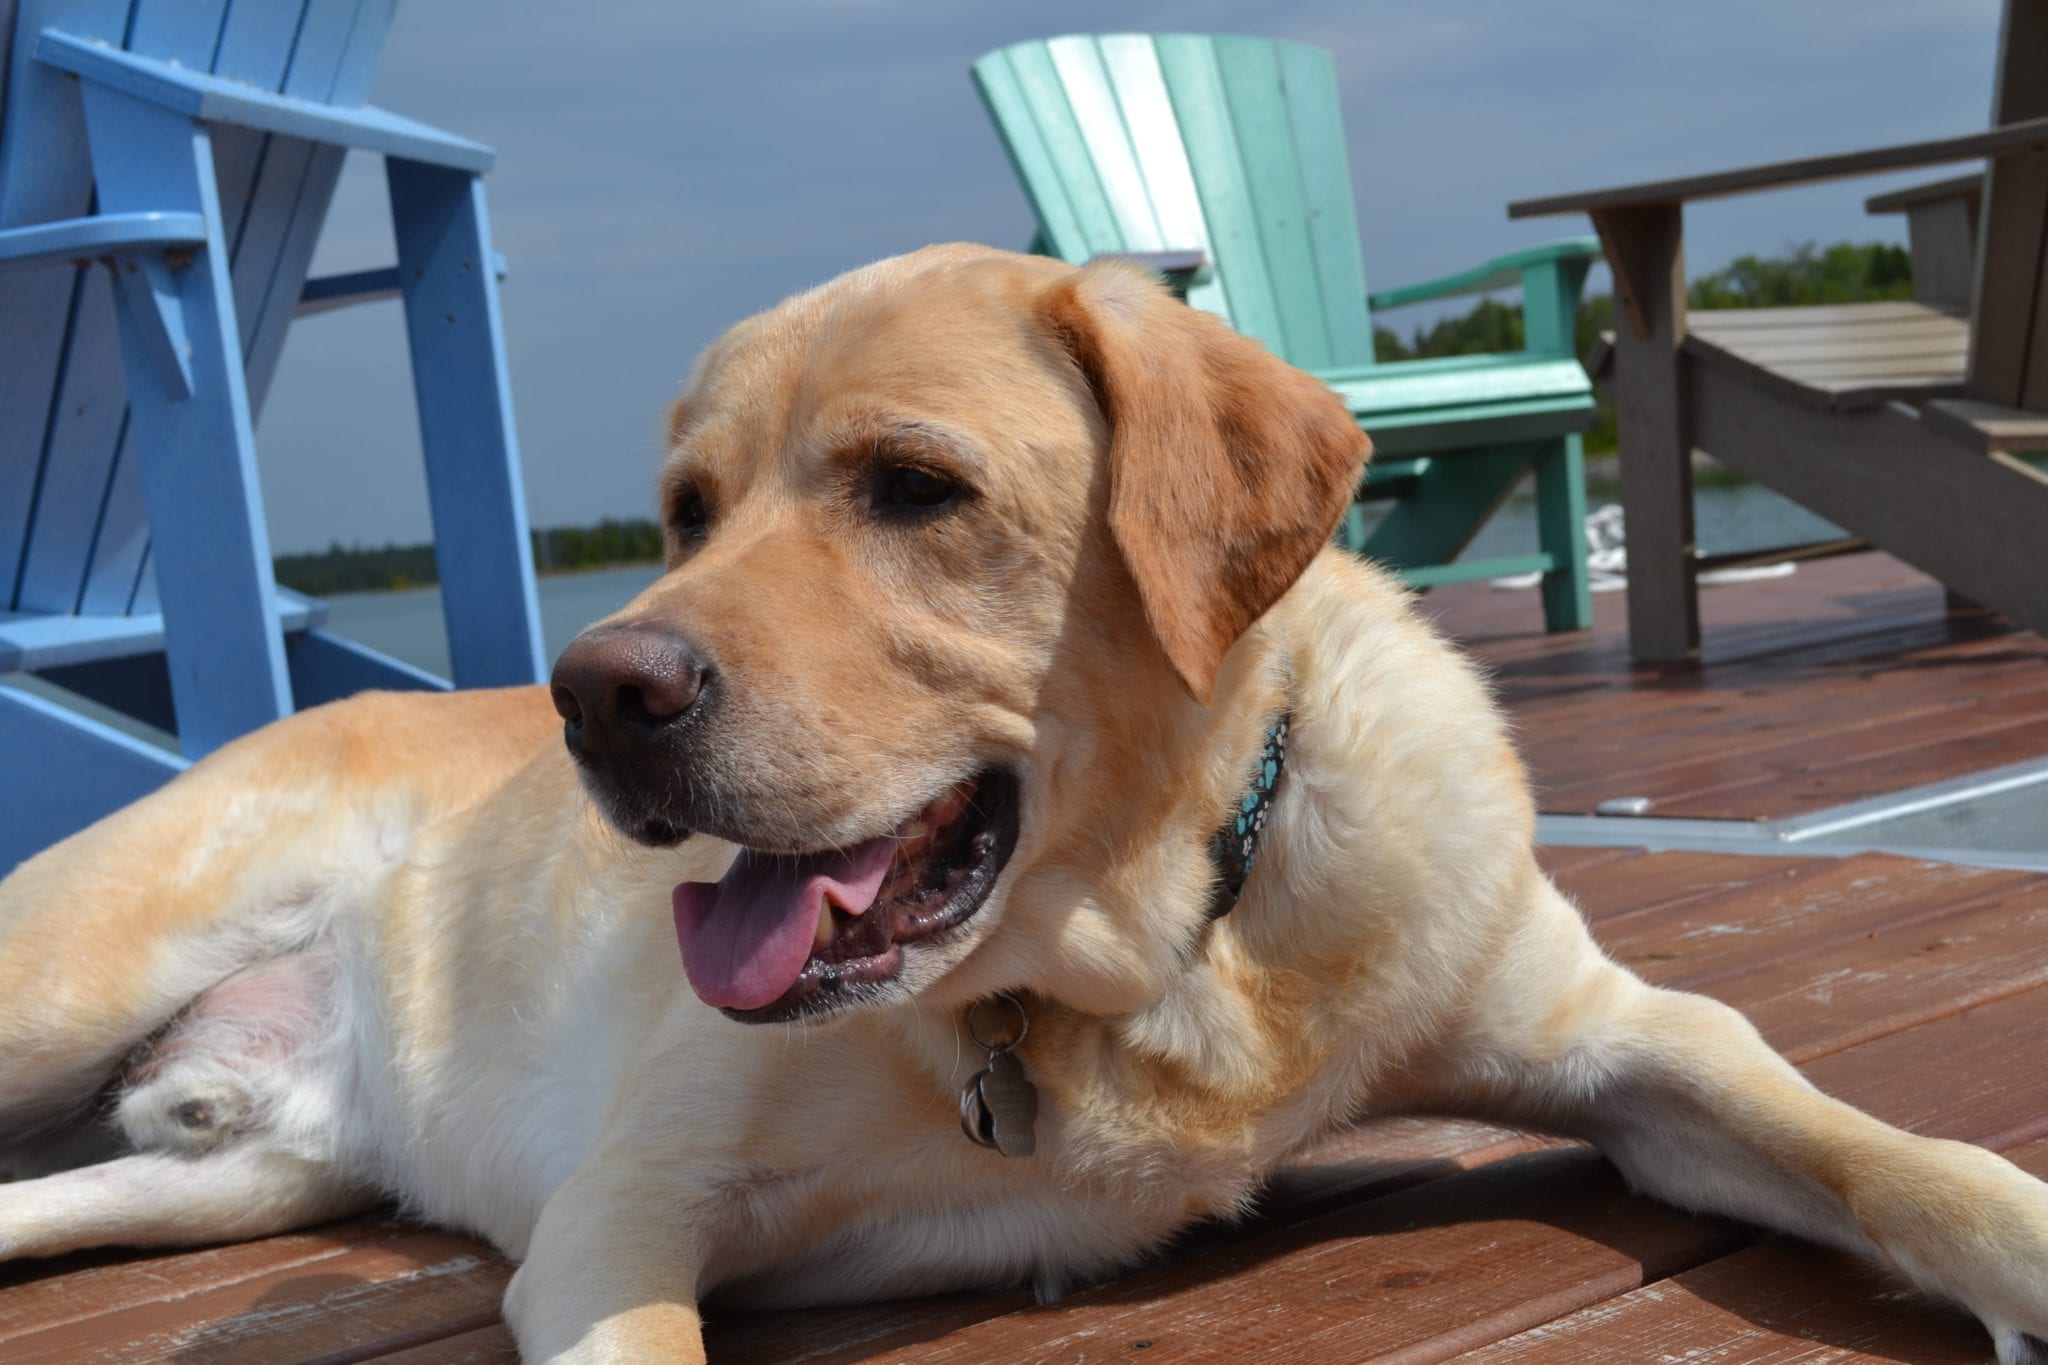 Summer Safety Tips for Pets